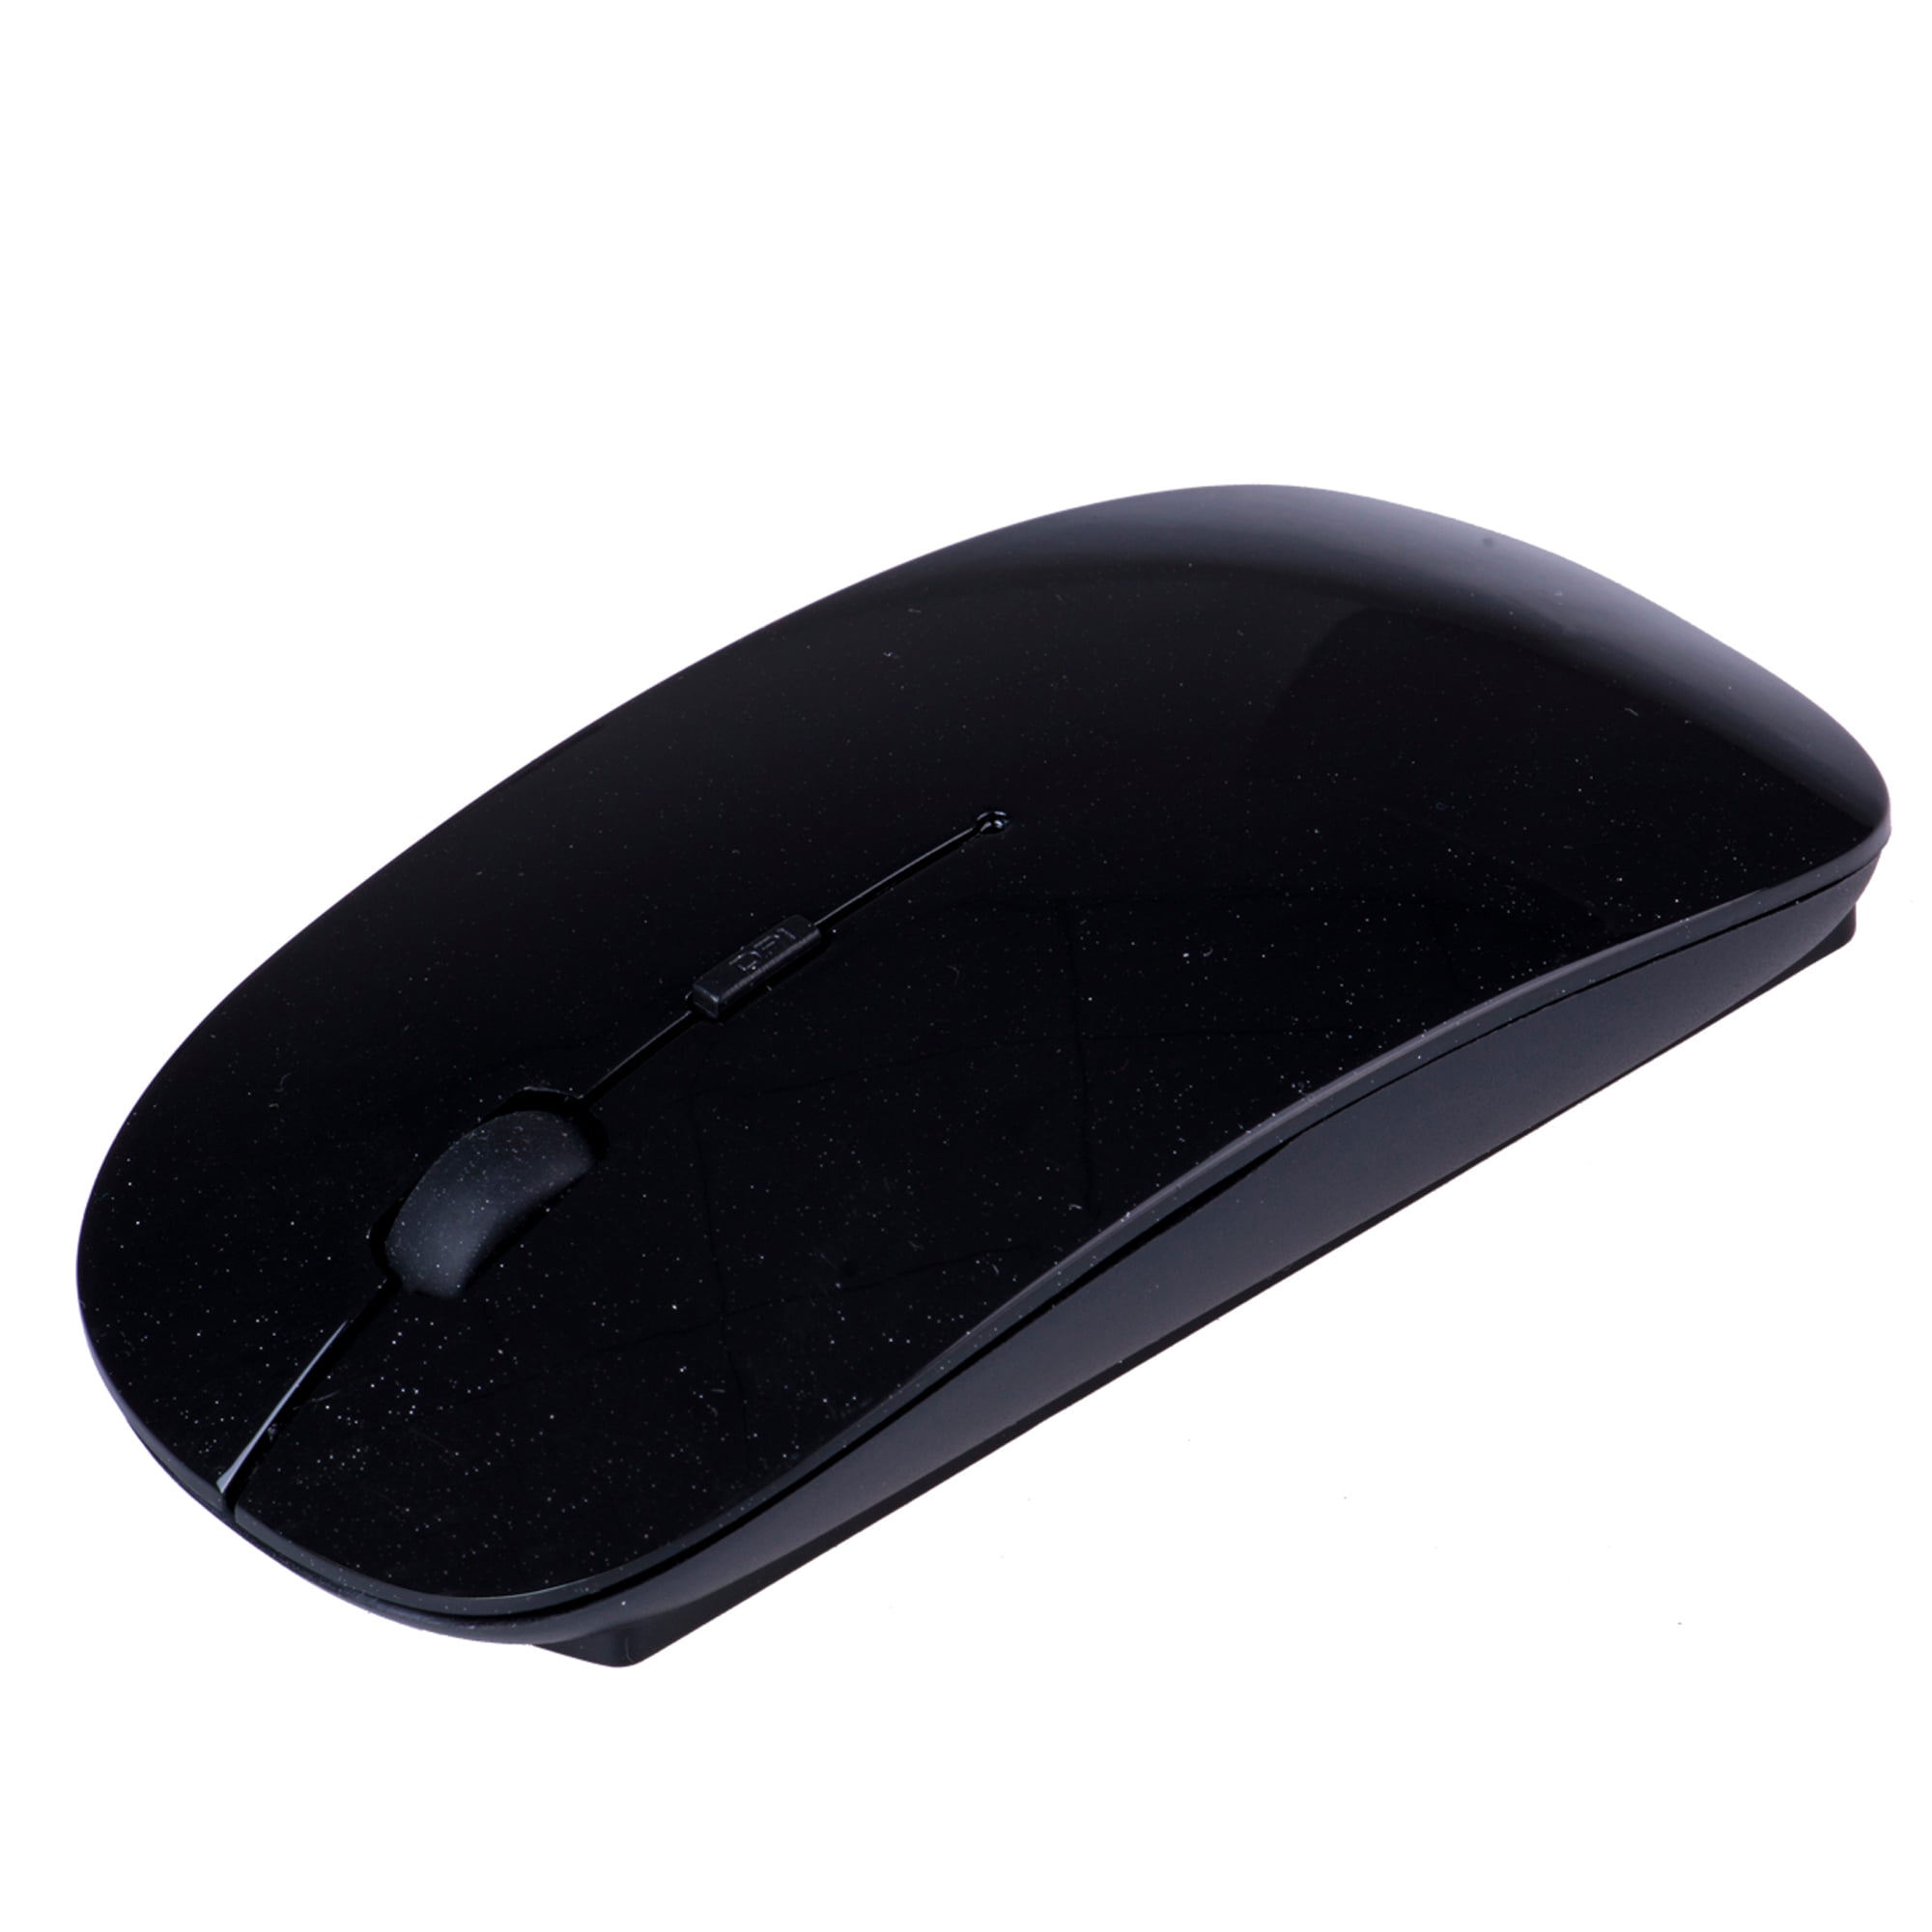 Zoiuytrg Ultra Thin Usb Optical Wireless Mouse 24g Receiver Super Slim